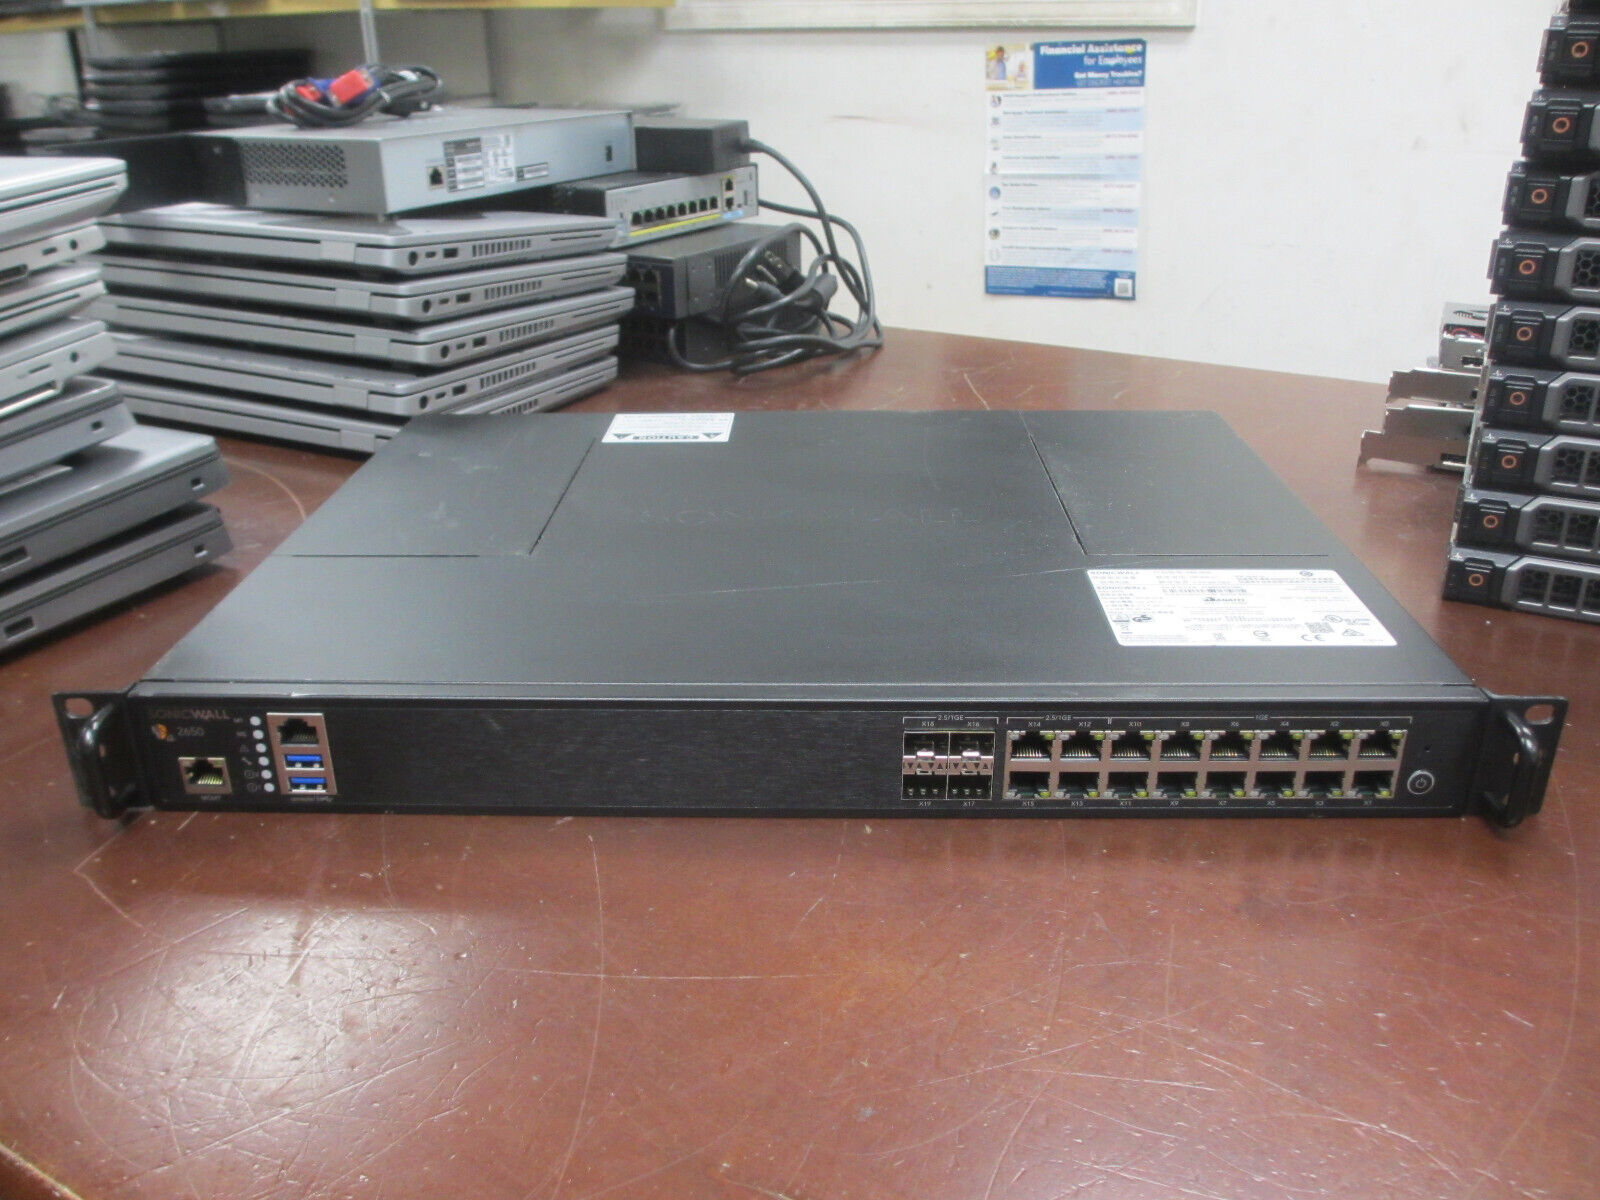 SonicWall NSA 2650 16-Port 1RK38-0C8 Network Security Appliance